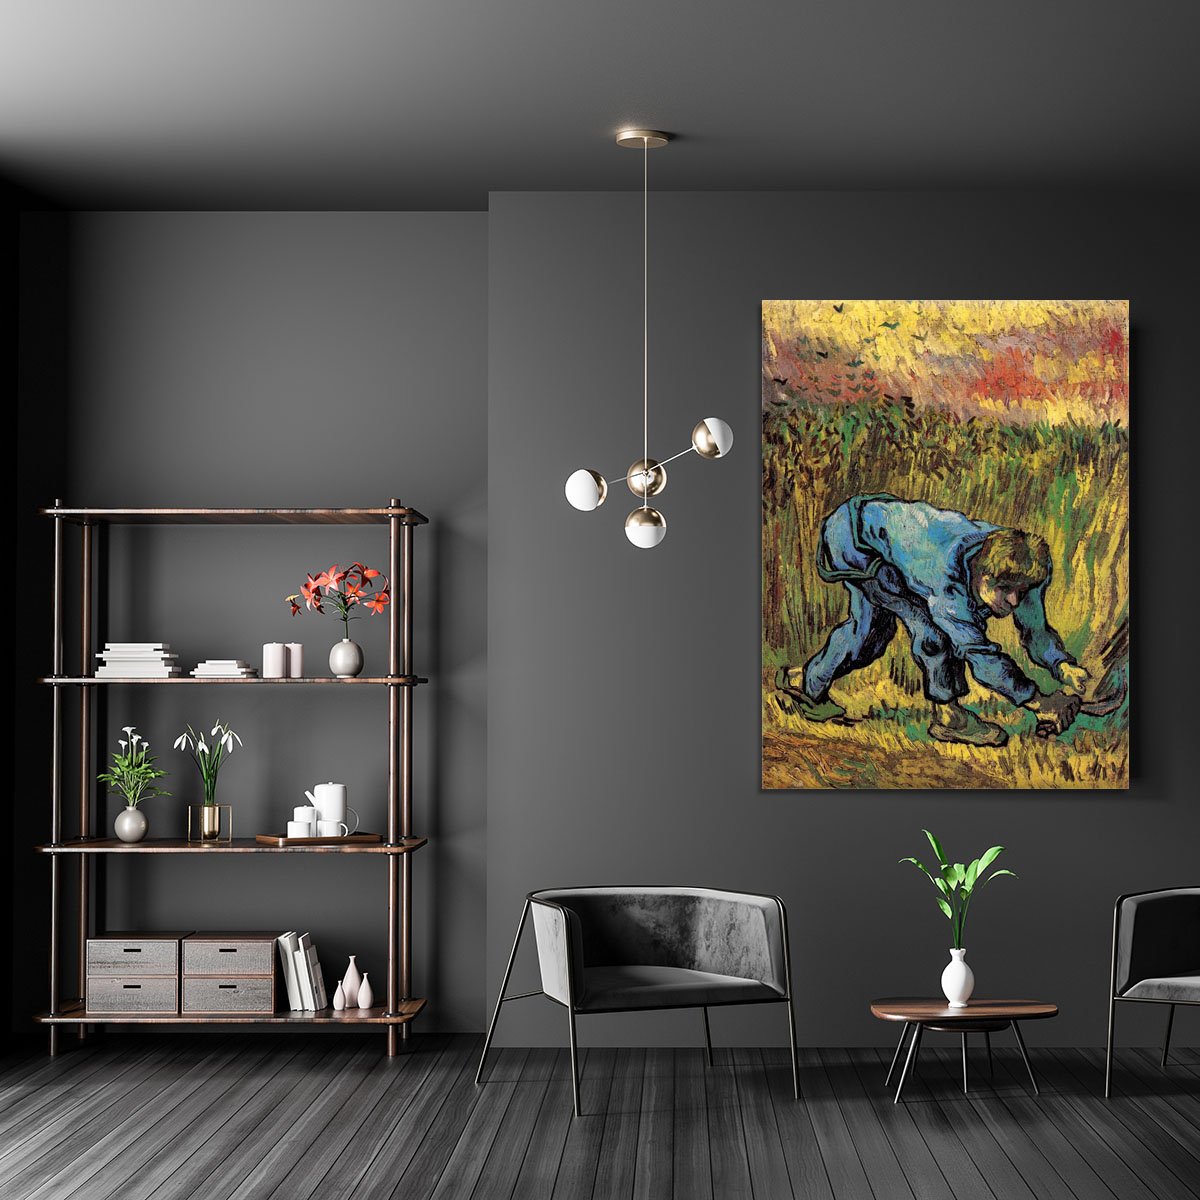 Reaper with Sickle after Millet by Van Gogh Canvas Print or Poster